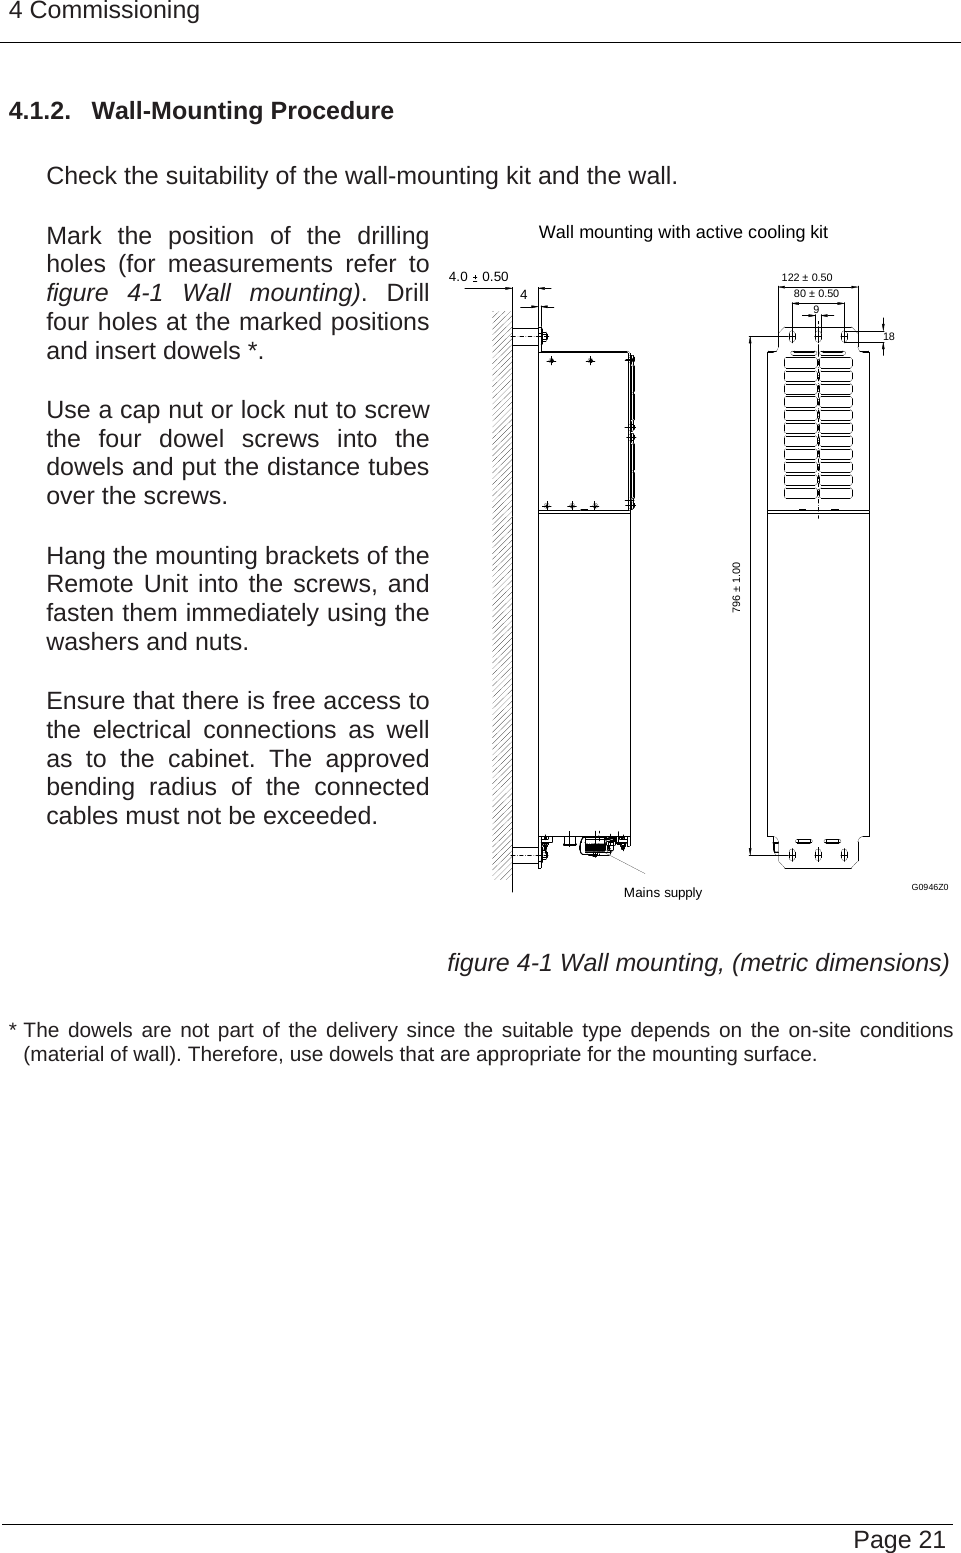 4 Commissioning   Page 214.1.2.  Wall-Mounting Procedure     Check the suitability of the wall-mounting kit and the wall.     Mark the position of the drilling holes (for measurements refer to figure 4-1 Wall mounting). Drill four holes at the marked positions and insert dowels *.     Use a cap nut or lock nut to screw the four dowel screws into the dowels and put the distance tubes over the screws.     Hang the mounting brackets of the Remote Unit into the screws, and fasten them immediately using the washers and nuts.     Ensure that there is free access to the electrical connections as well as to the cabinet. The approved bending radius of the connected cables must not be exceeded.   Wall mounting with active cooling kit4.0  0.504Mains supply980 ± 0.50122 ± 0.5018796 ± 1.00G0946Z0 figure 4-1 Wall mounting, (metric dimensions) * The dowels are not part of the delivery since the suitable type depends on the on-site conditions (material of wall). Therefore, use dowels that are appropriate for the mounting surface.   